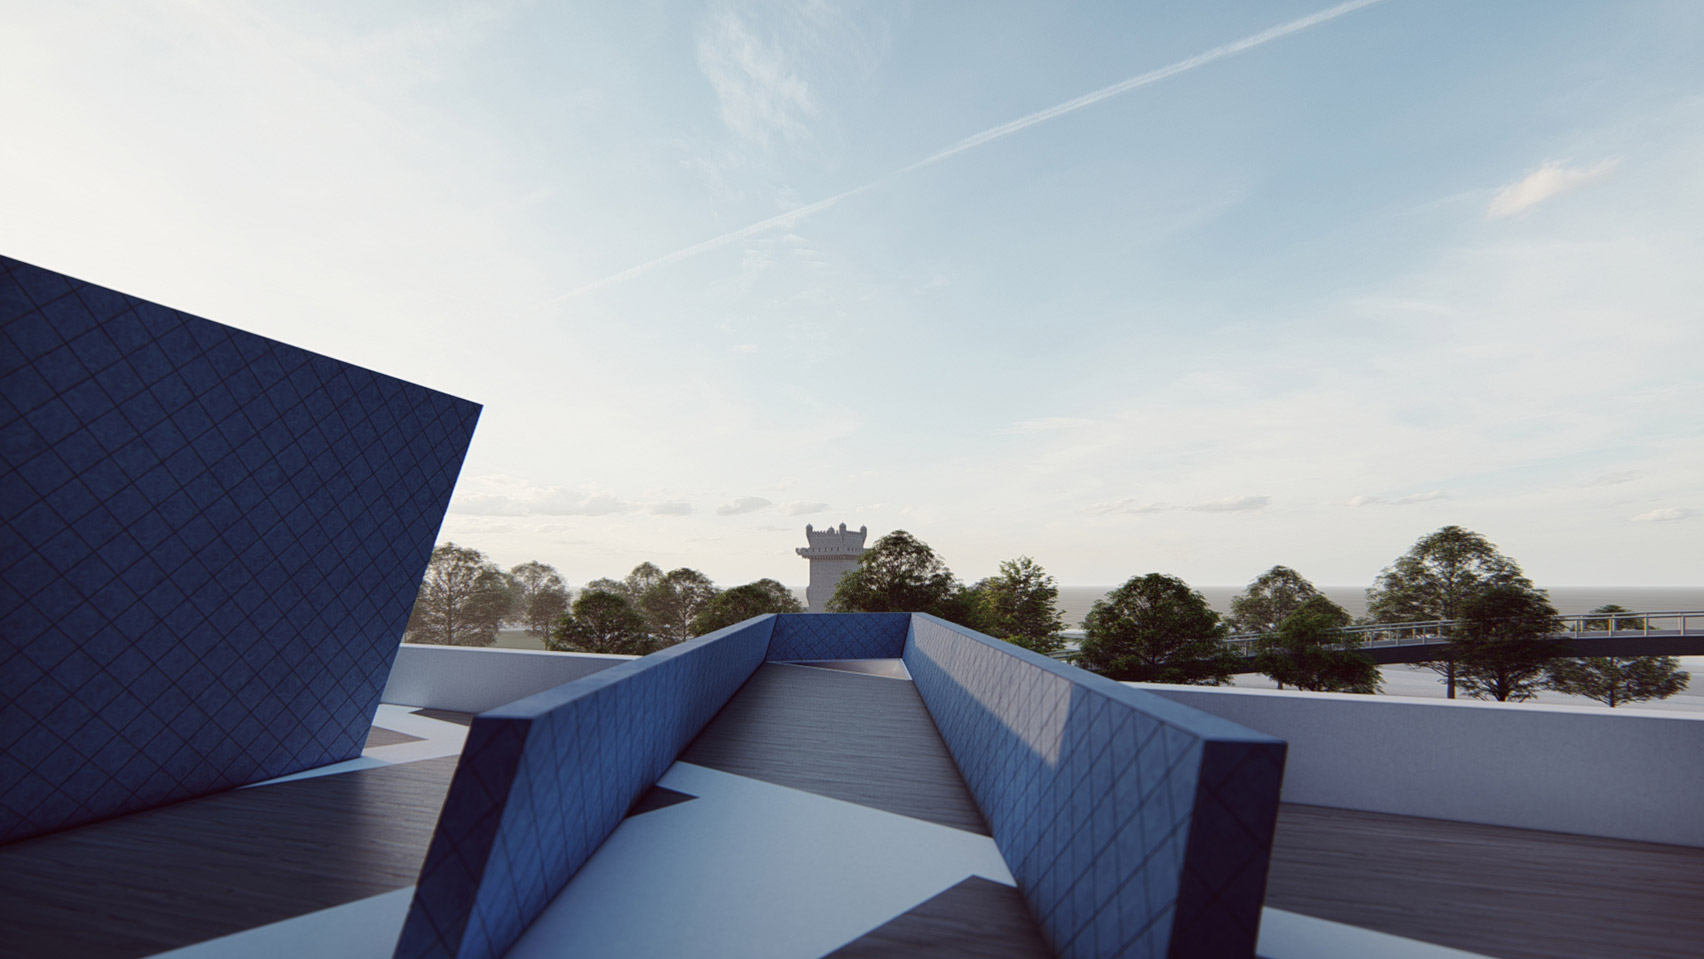 A visual of a museum roof terrace